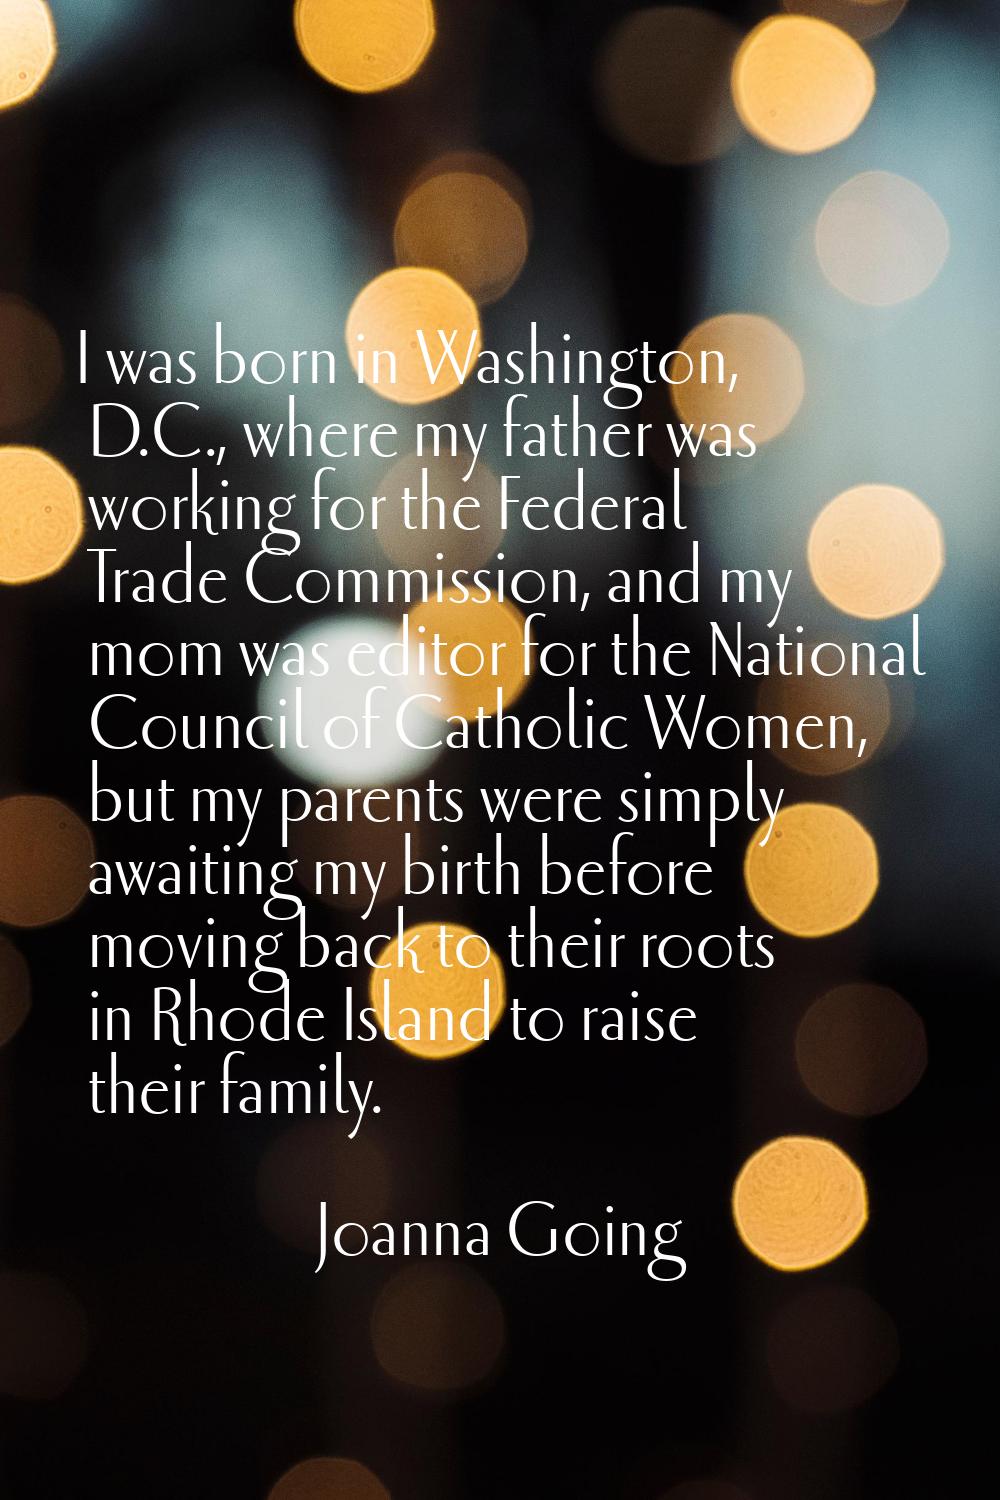 I was born in Washington, D.C., where my father was working for the Federal Trade Commission, and m